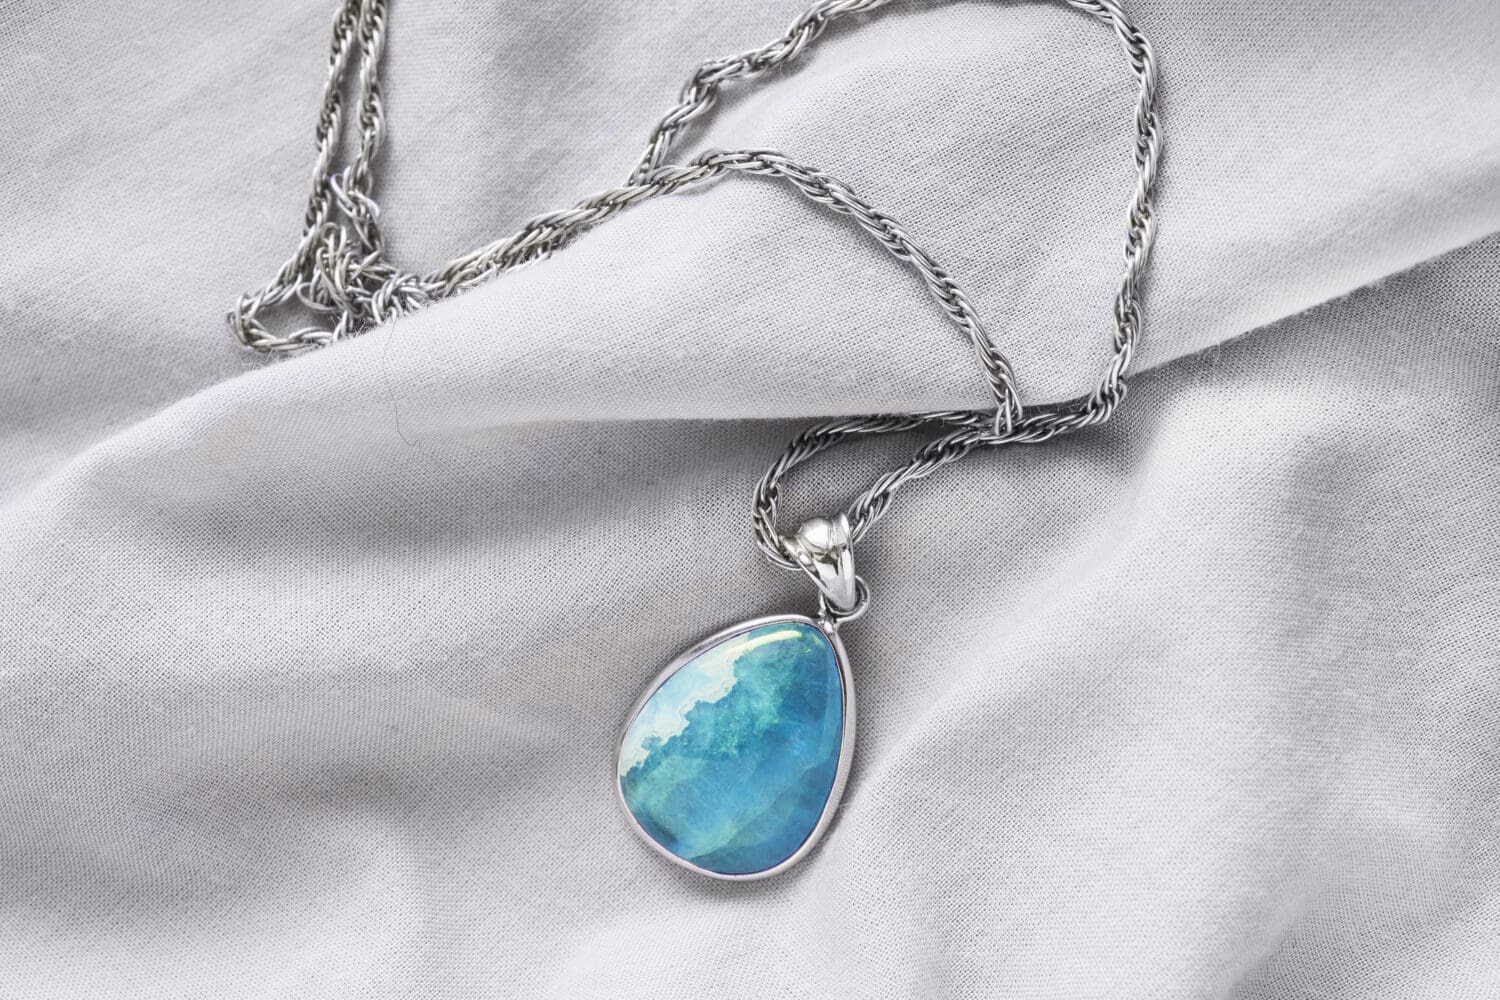 Aquamarine pendant on blank dray cloth as a background